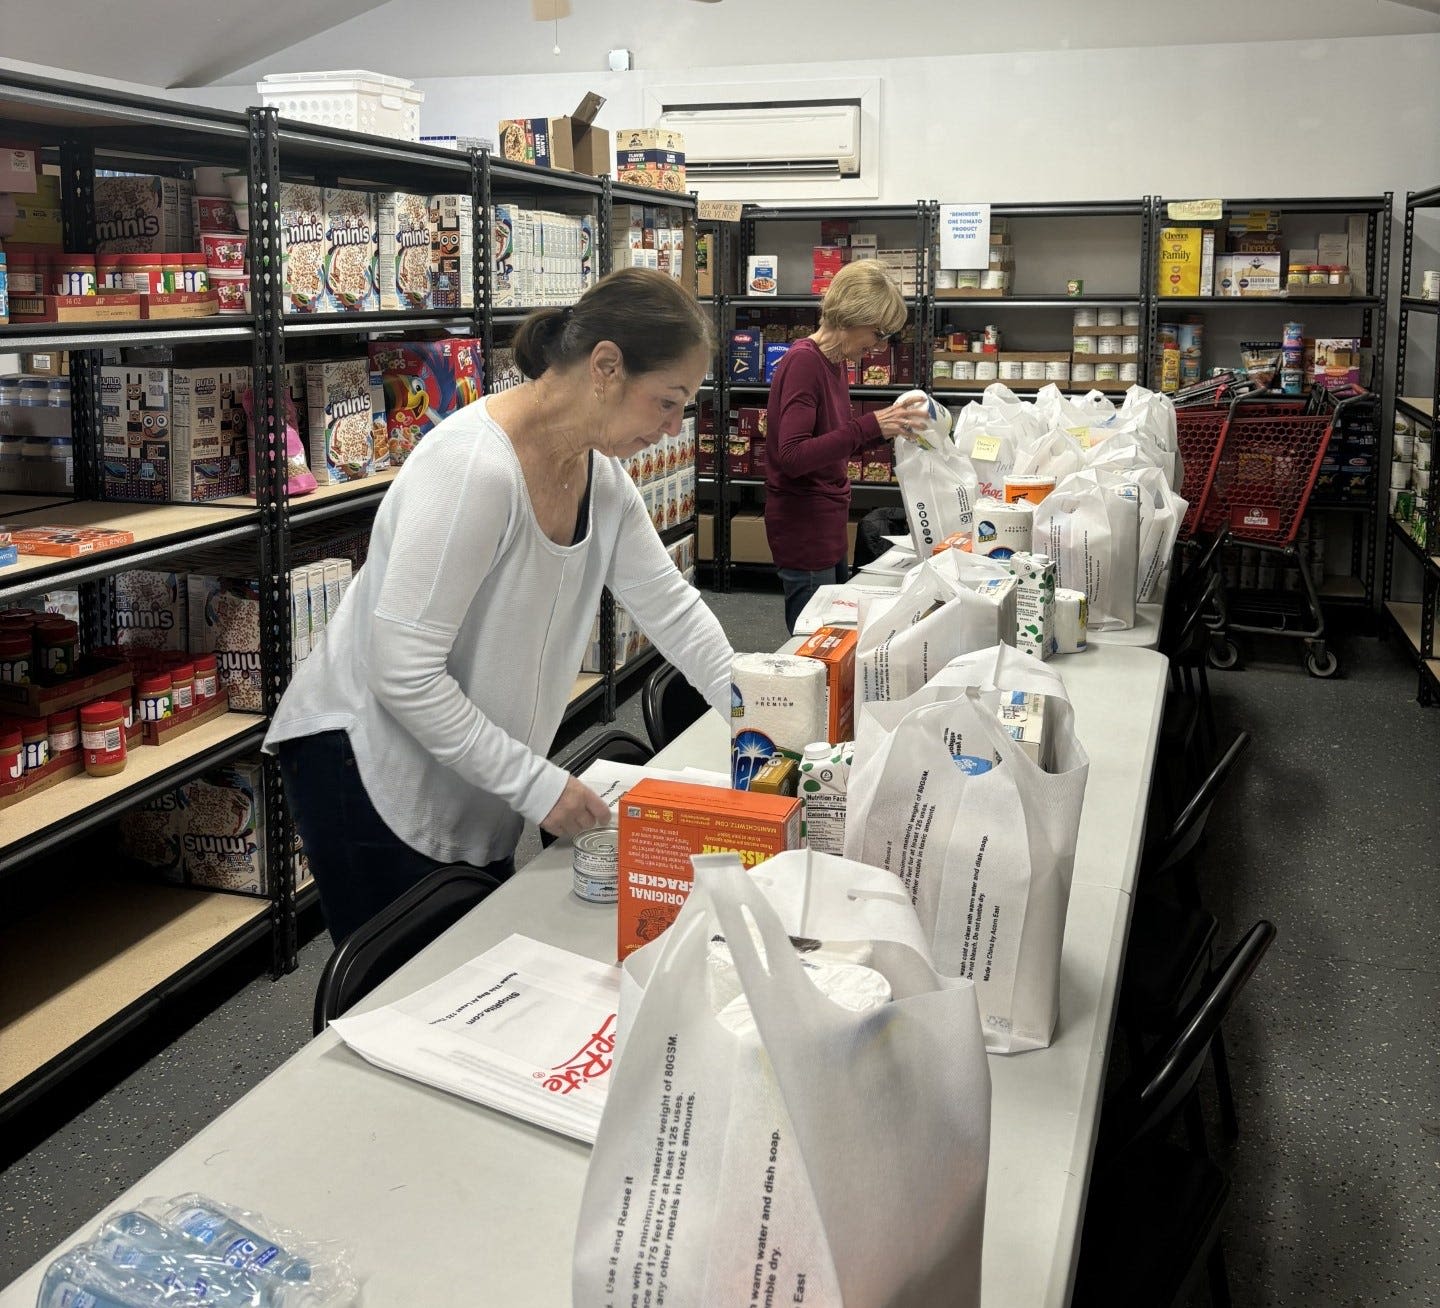 Local charities face rising costs and more food insecurity. A new fund aims to help